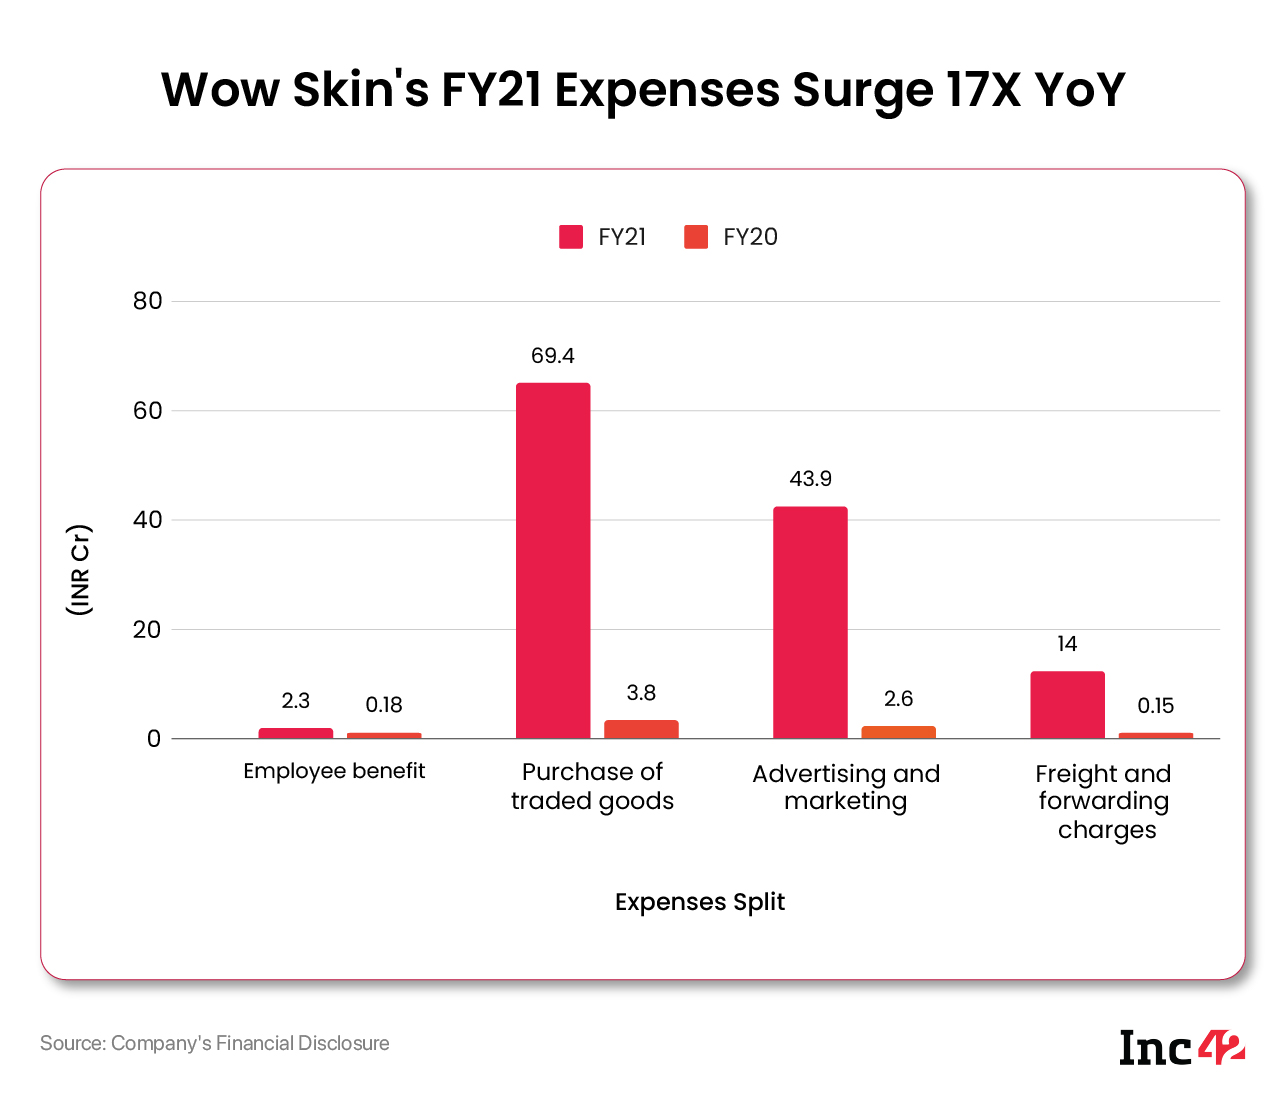 WOW Skin Science Slips Into Red, Reports Loss Of Over INR 8 Cr In FY21